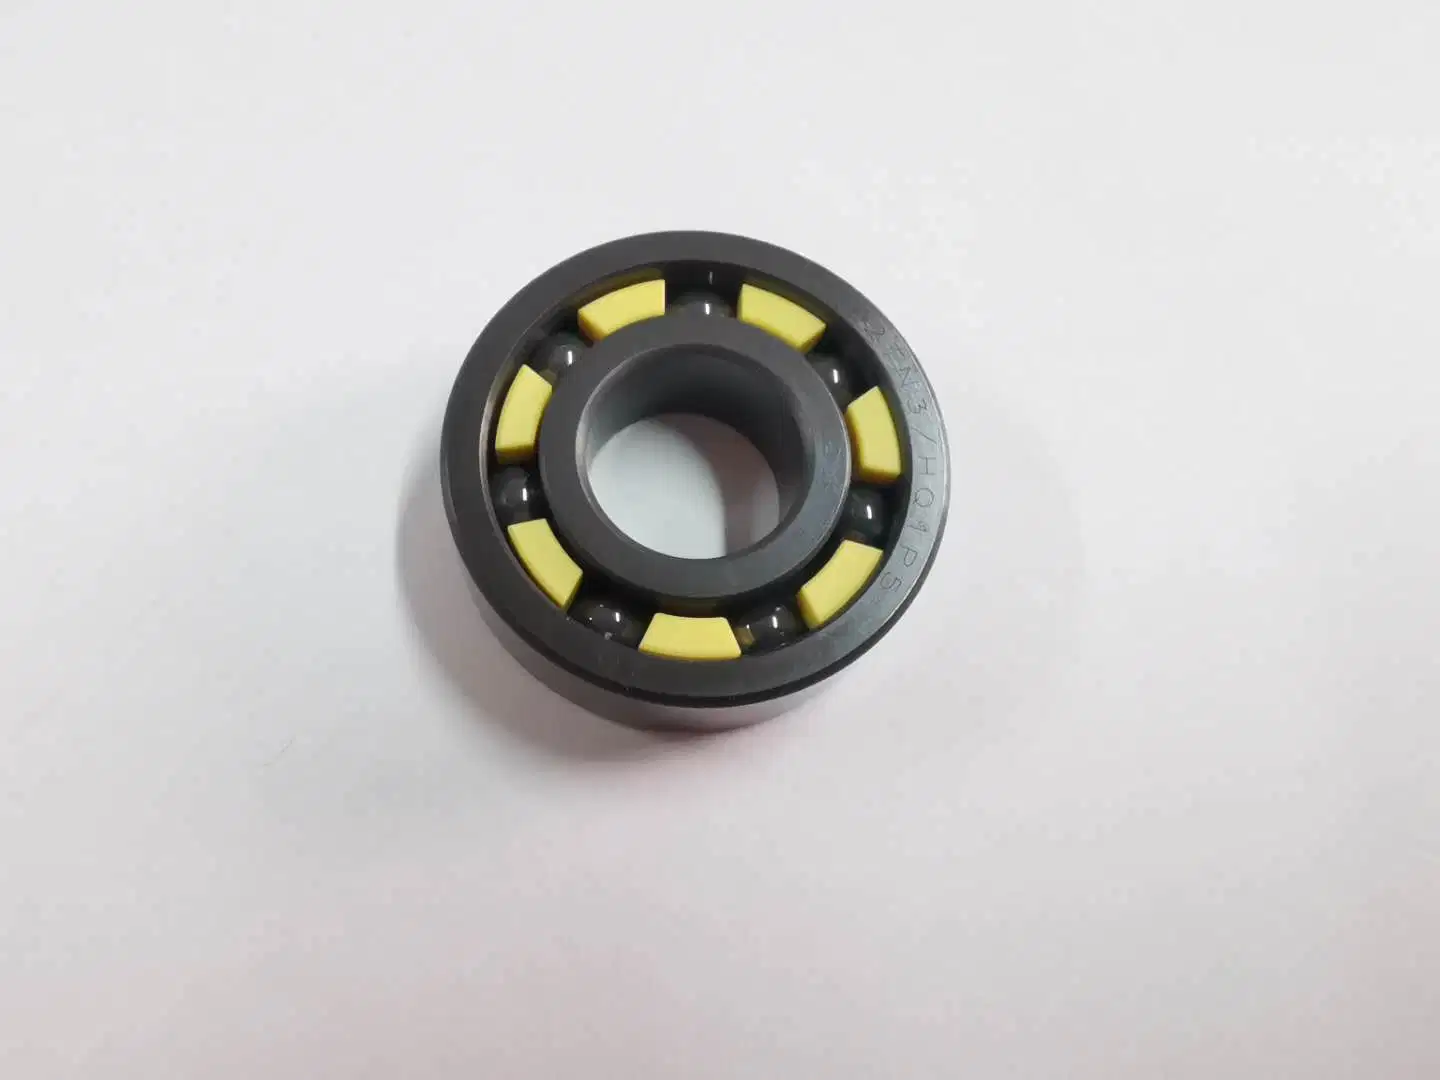 Zys High quality/High cost performance  Auto Parts Si3n4 Ceramic Bearing 685ce with Peek Cage